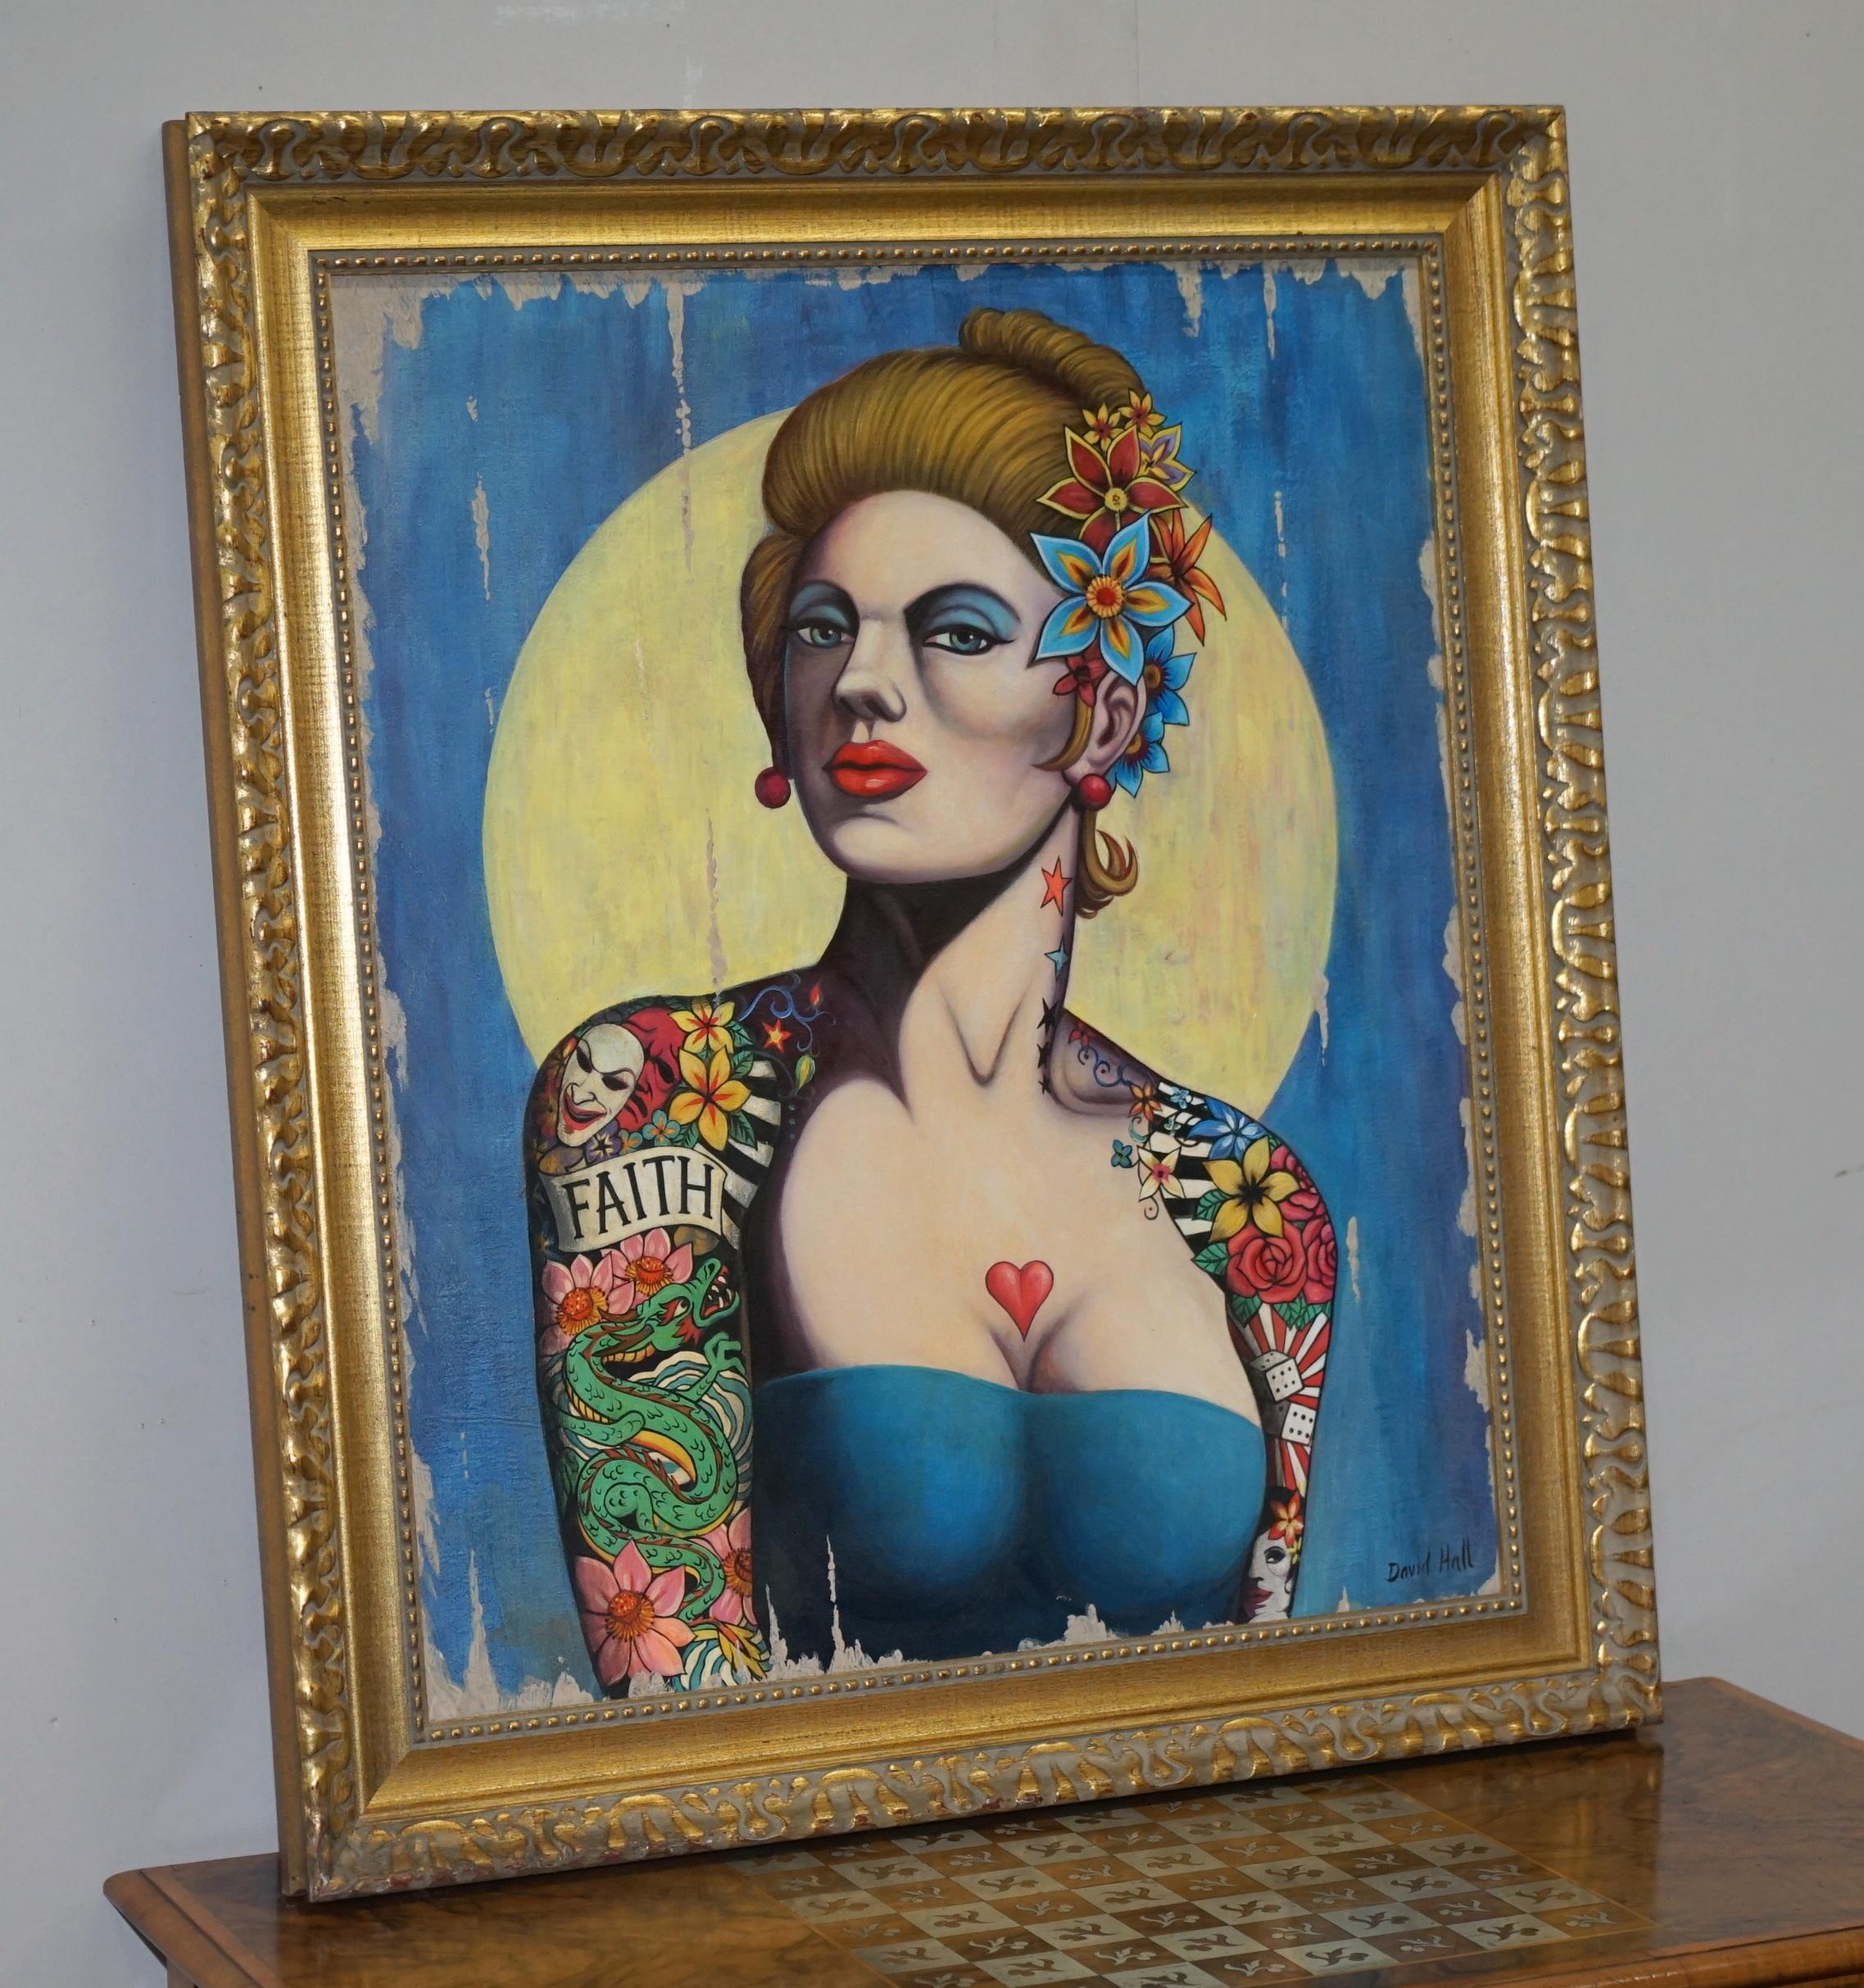 Other Sublime David Hall Oil on Boarding Painting of a Very Cool Heavily Tattooed Chic